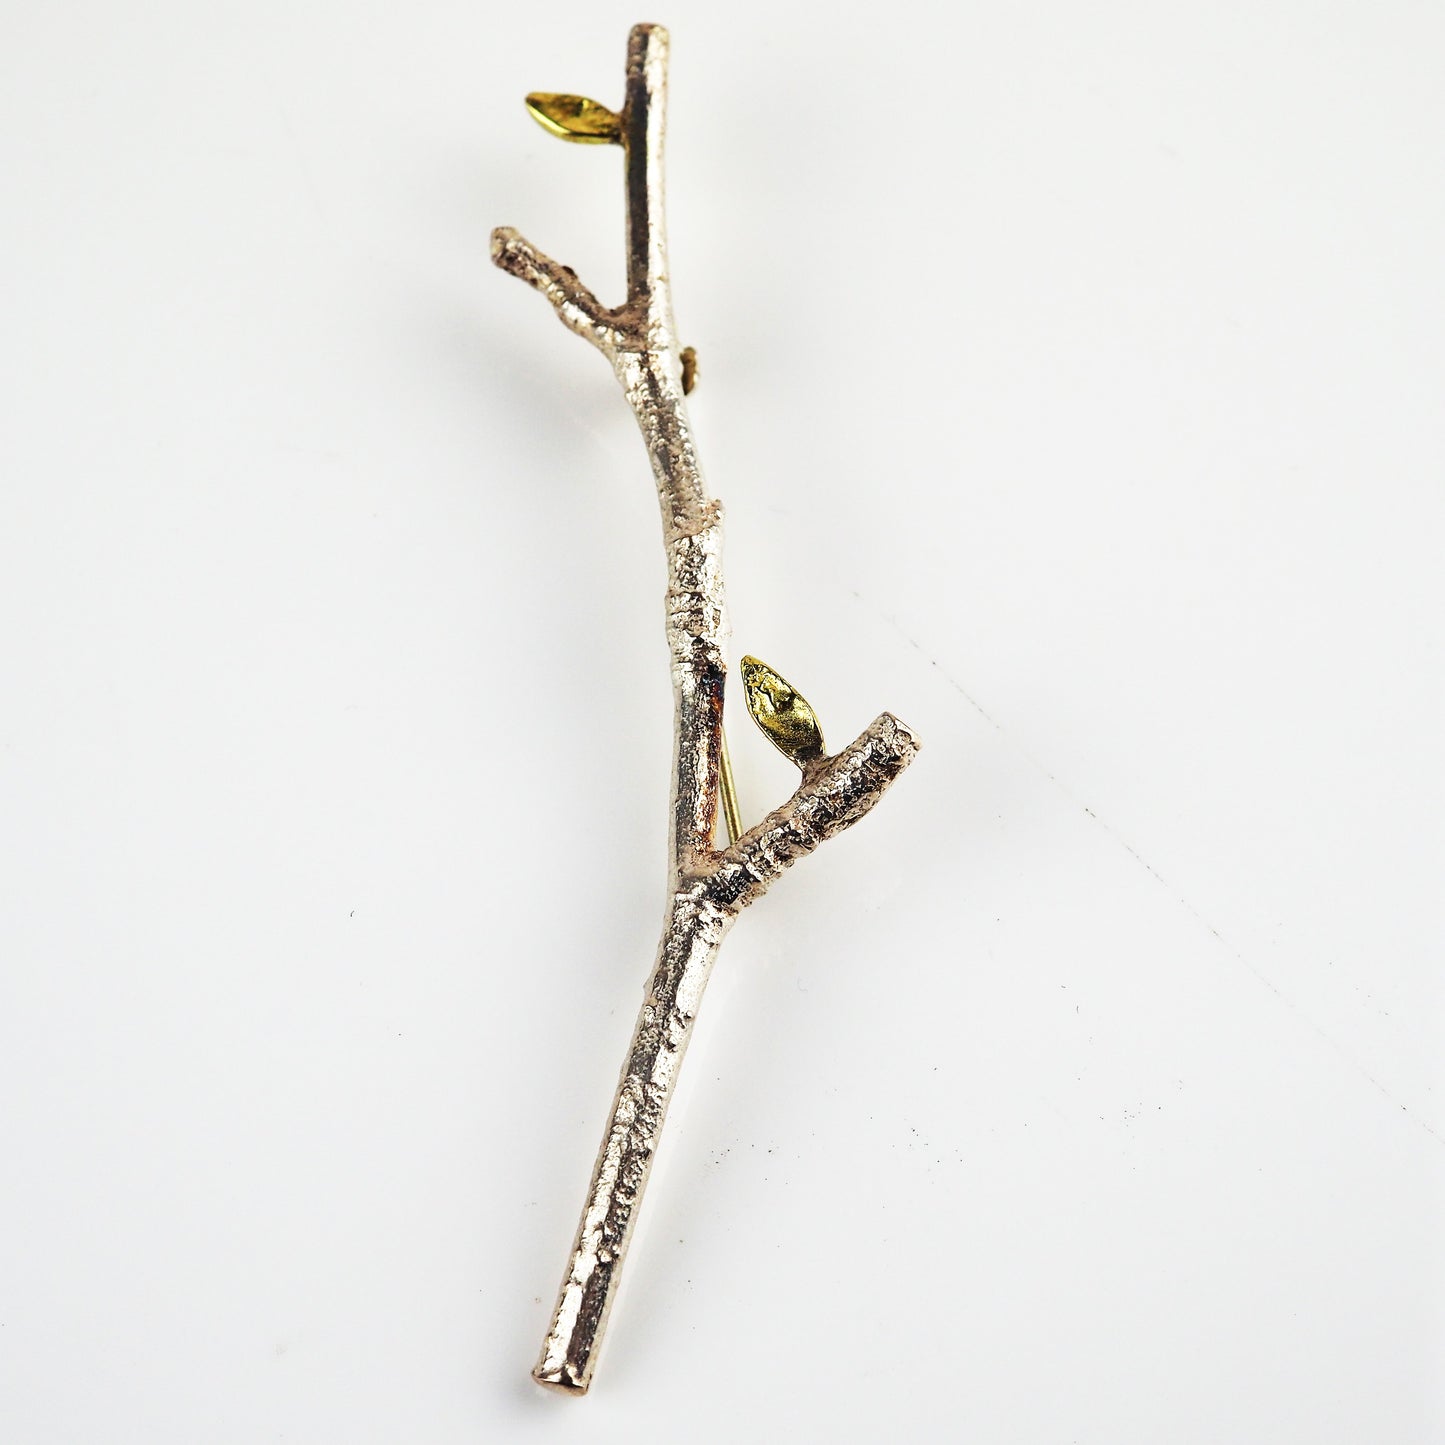 Belsher, Holly – Silver and Gold Brooch | Holly Belsher | Primavera Gallery